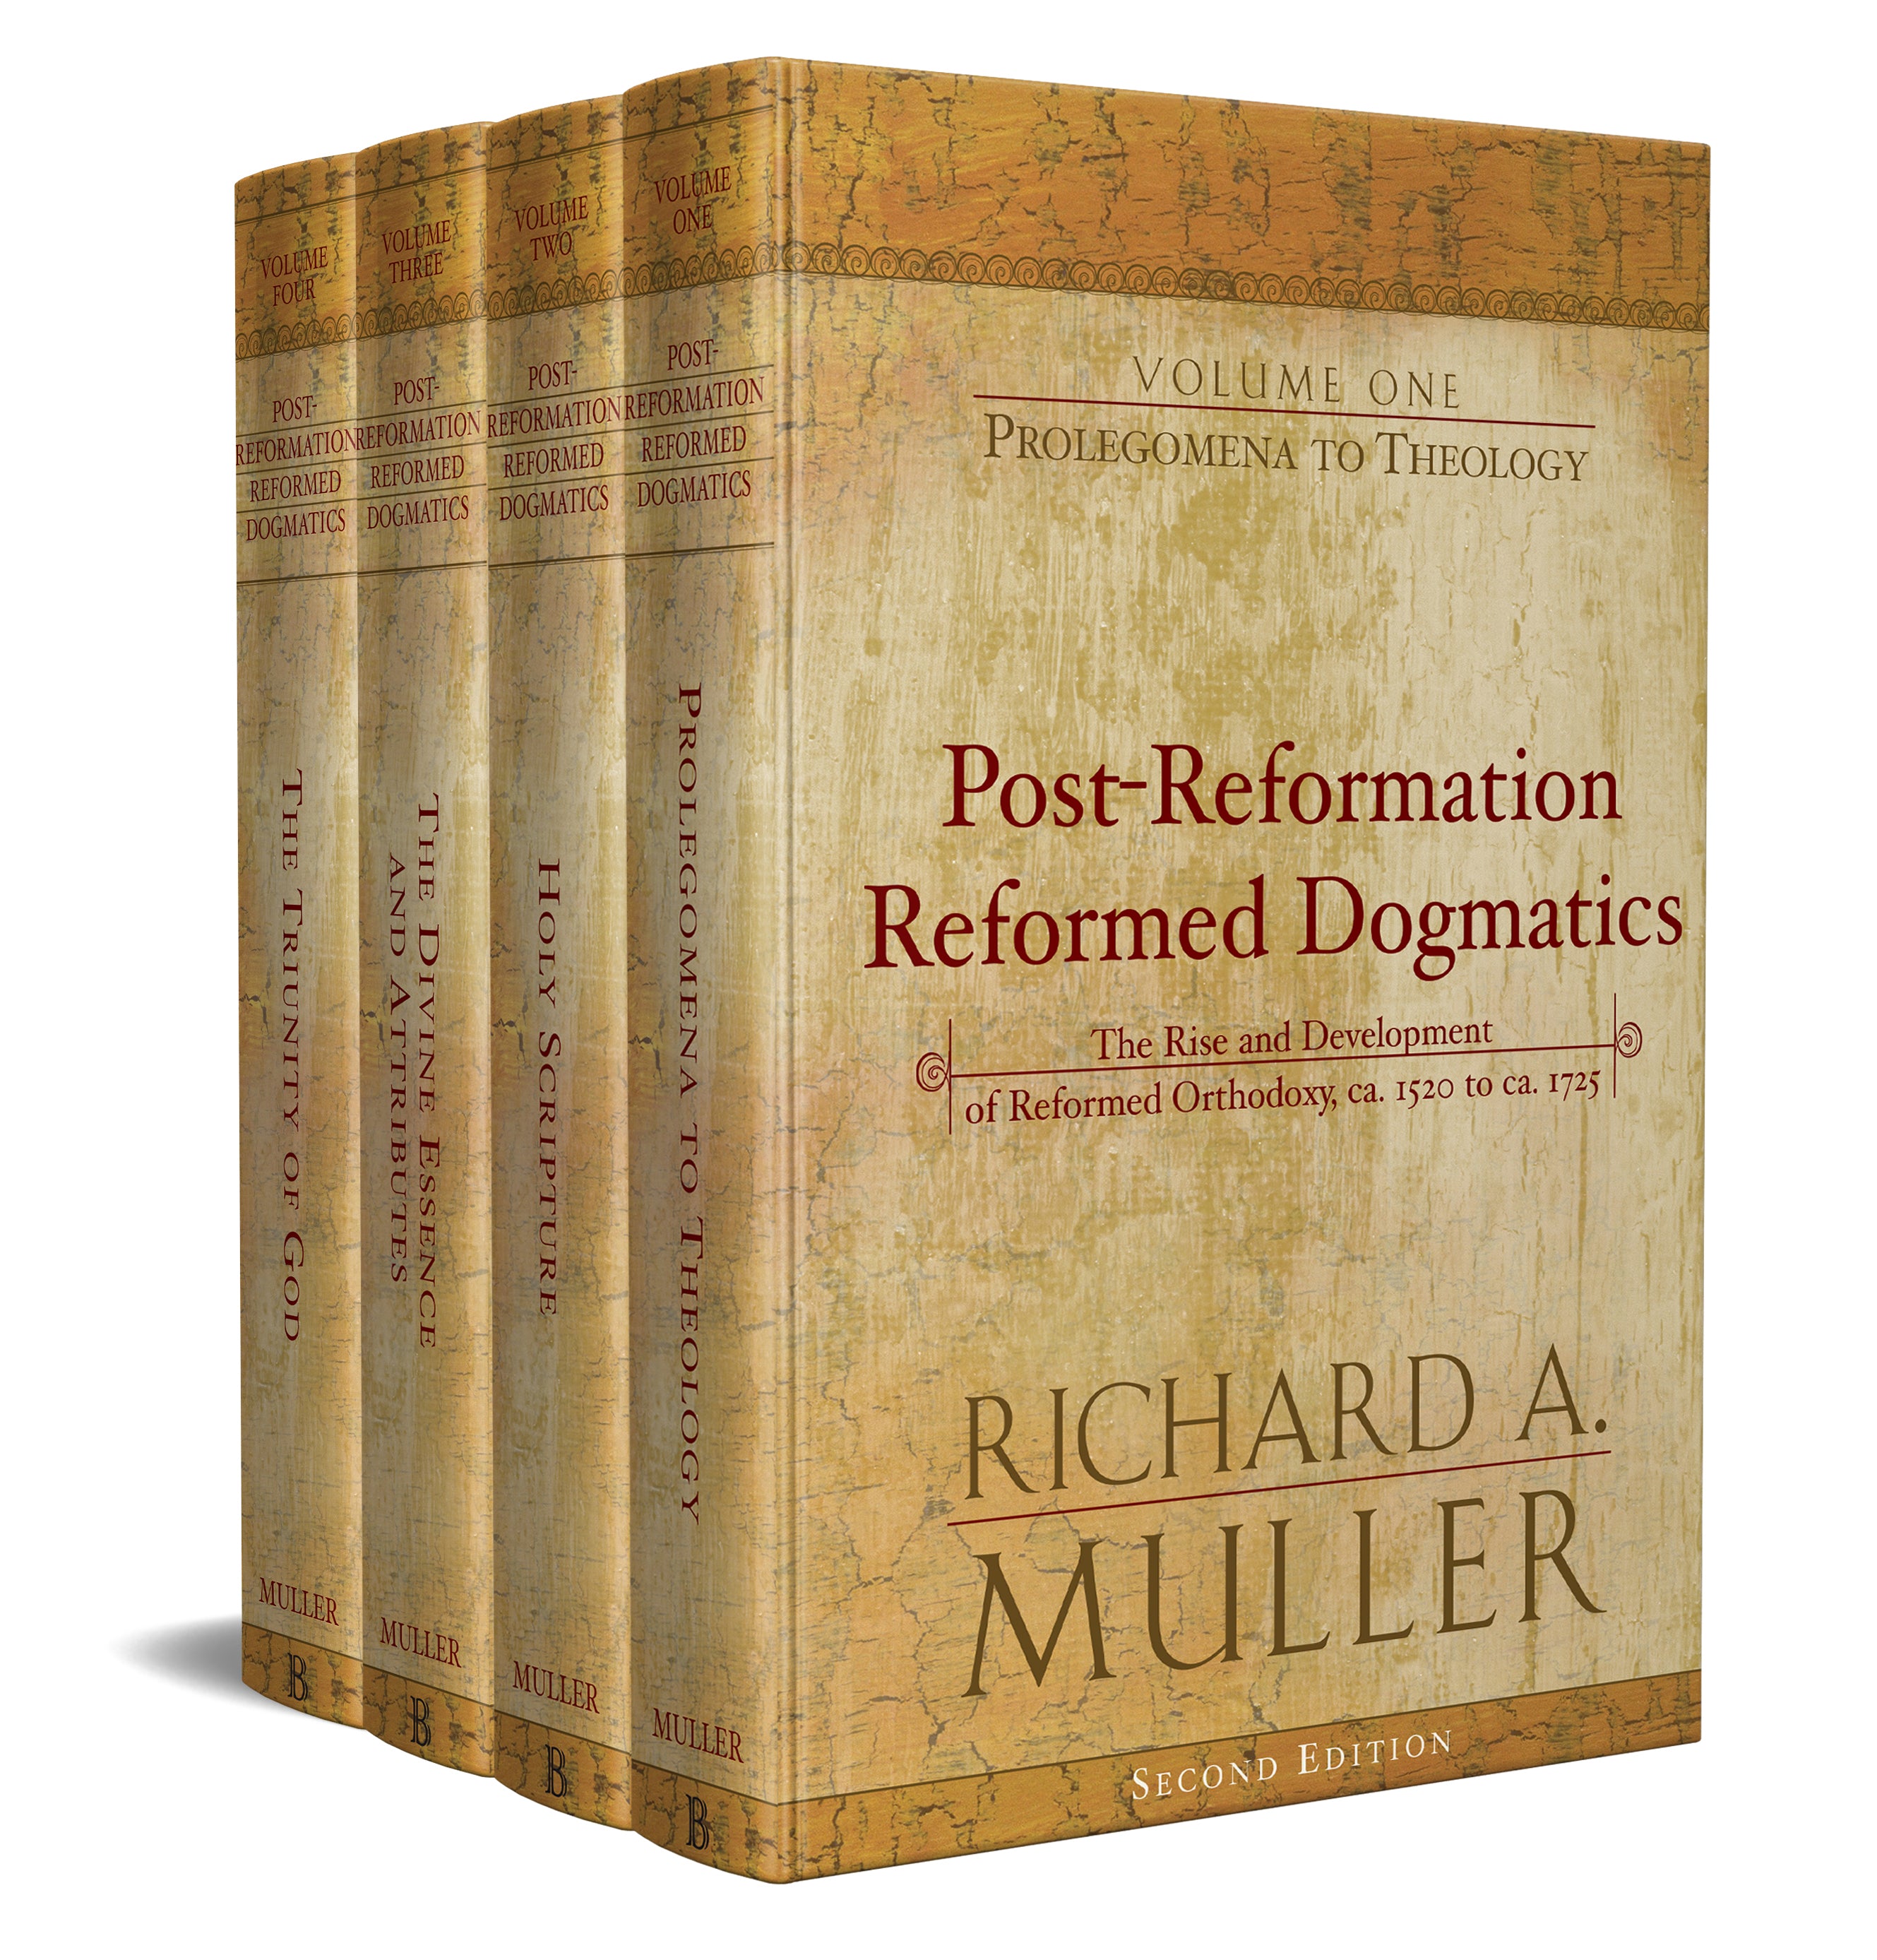 9780801026188　Rise　and　1725　Orthodoxy,　Development　Dogmatics:　Post-Reformation　Ca.　Ca.　1520　to　(Revised)　of　Richard　Reformed　–　Westminster　Muller,　The　A.　Reformed　Bookstore